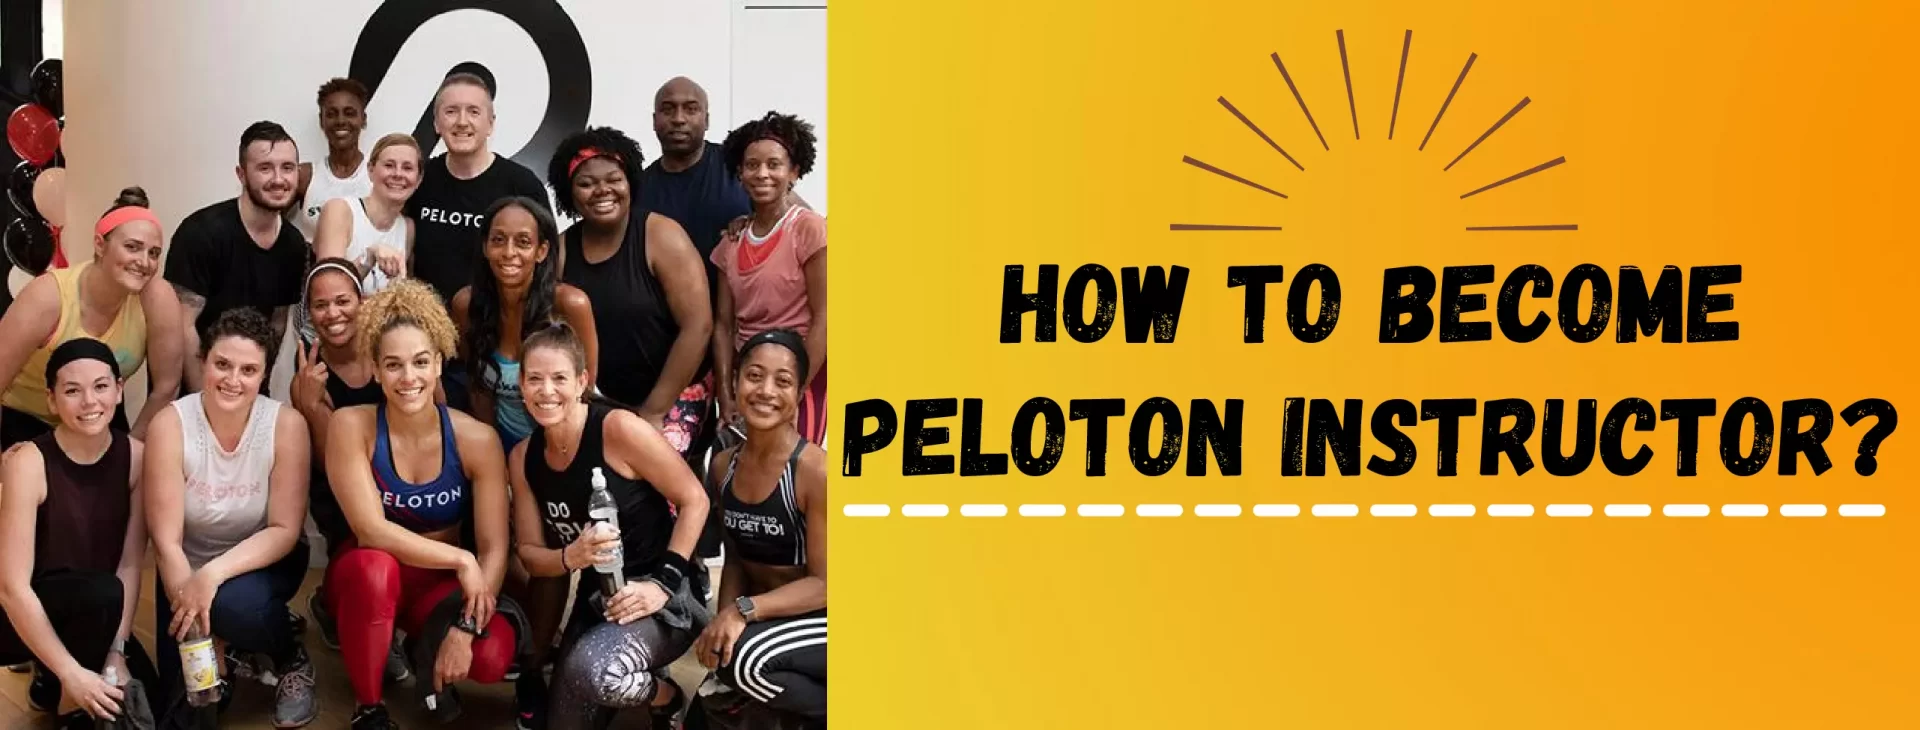 How To Become Peloton Instructor